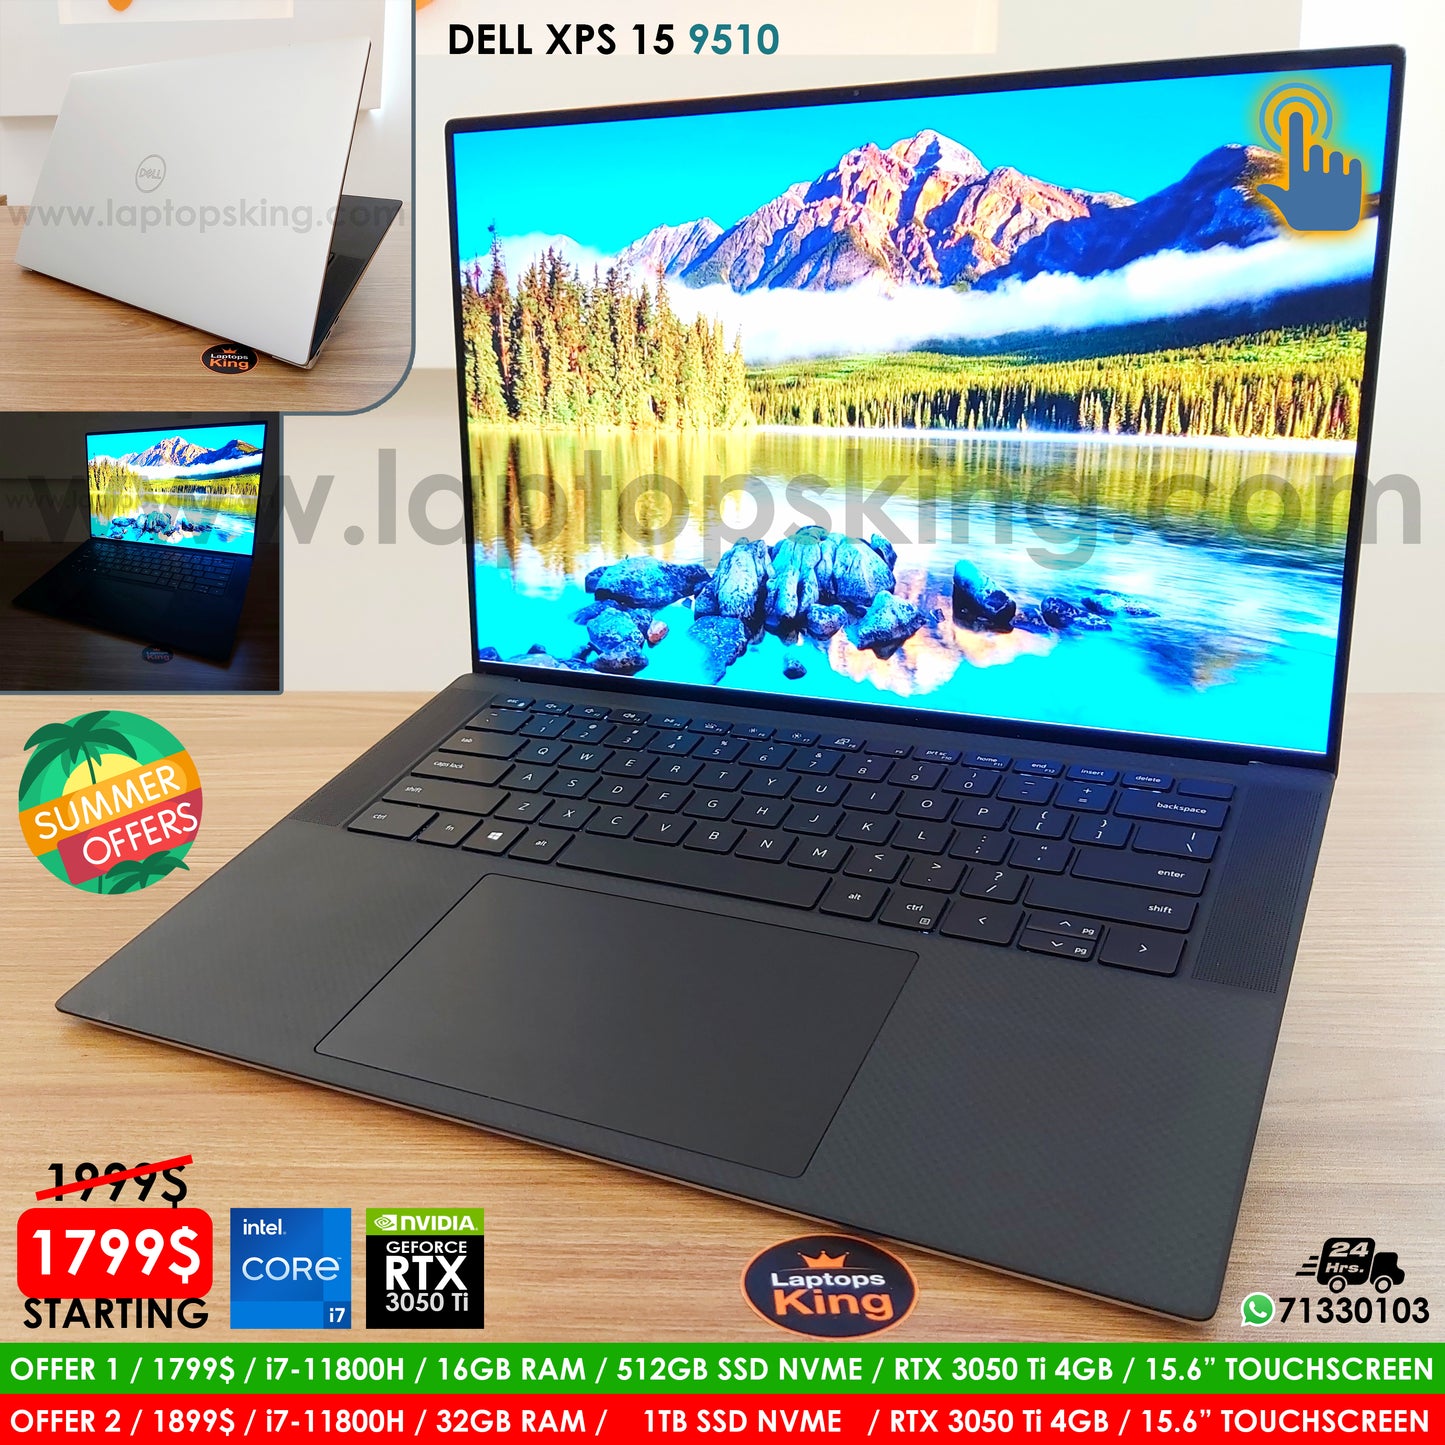 Dell XPS 15 9510 RTX 3050 Ti Gaming Laptop Offers (New Open Box)